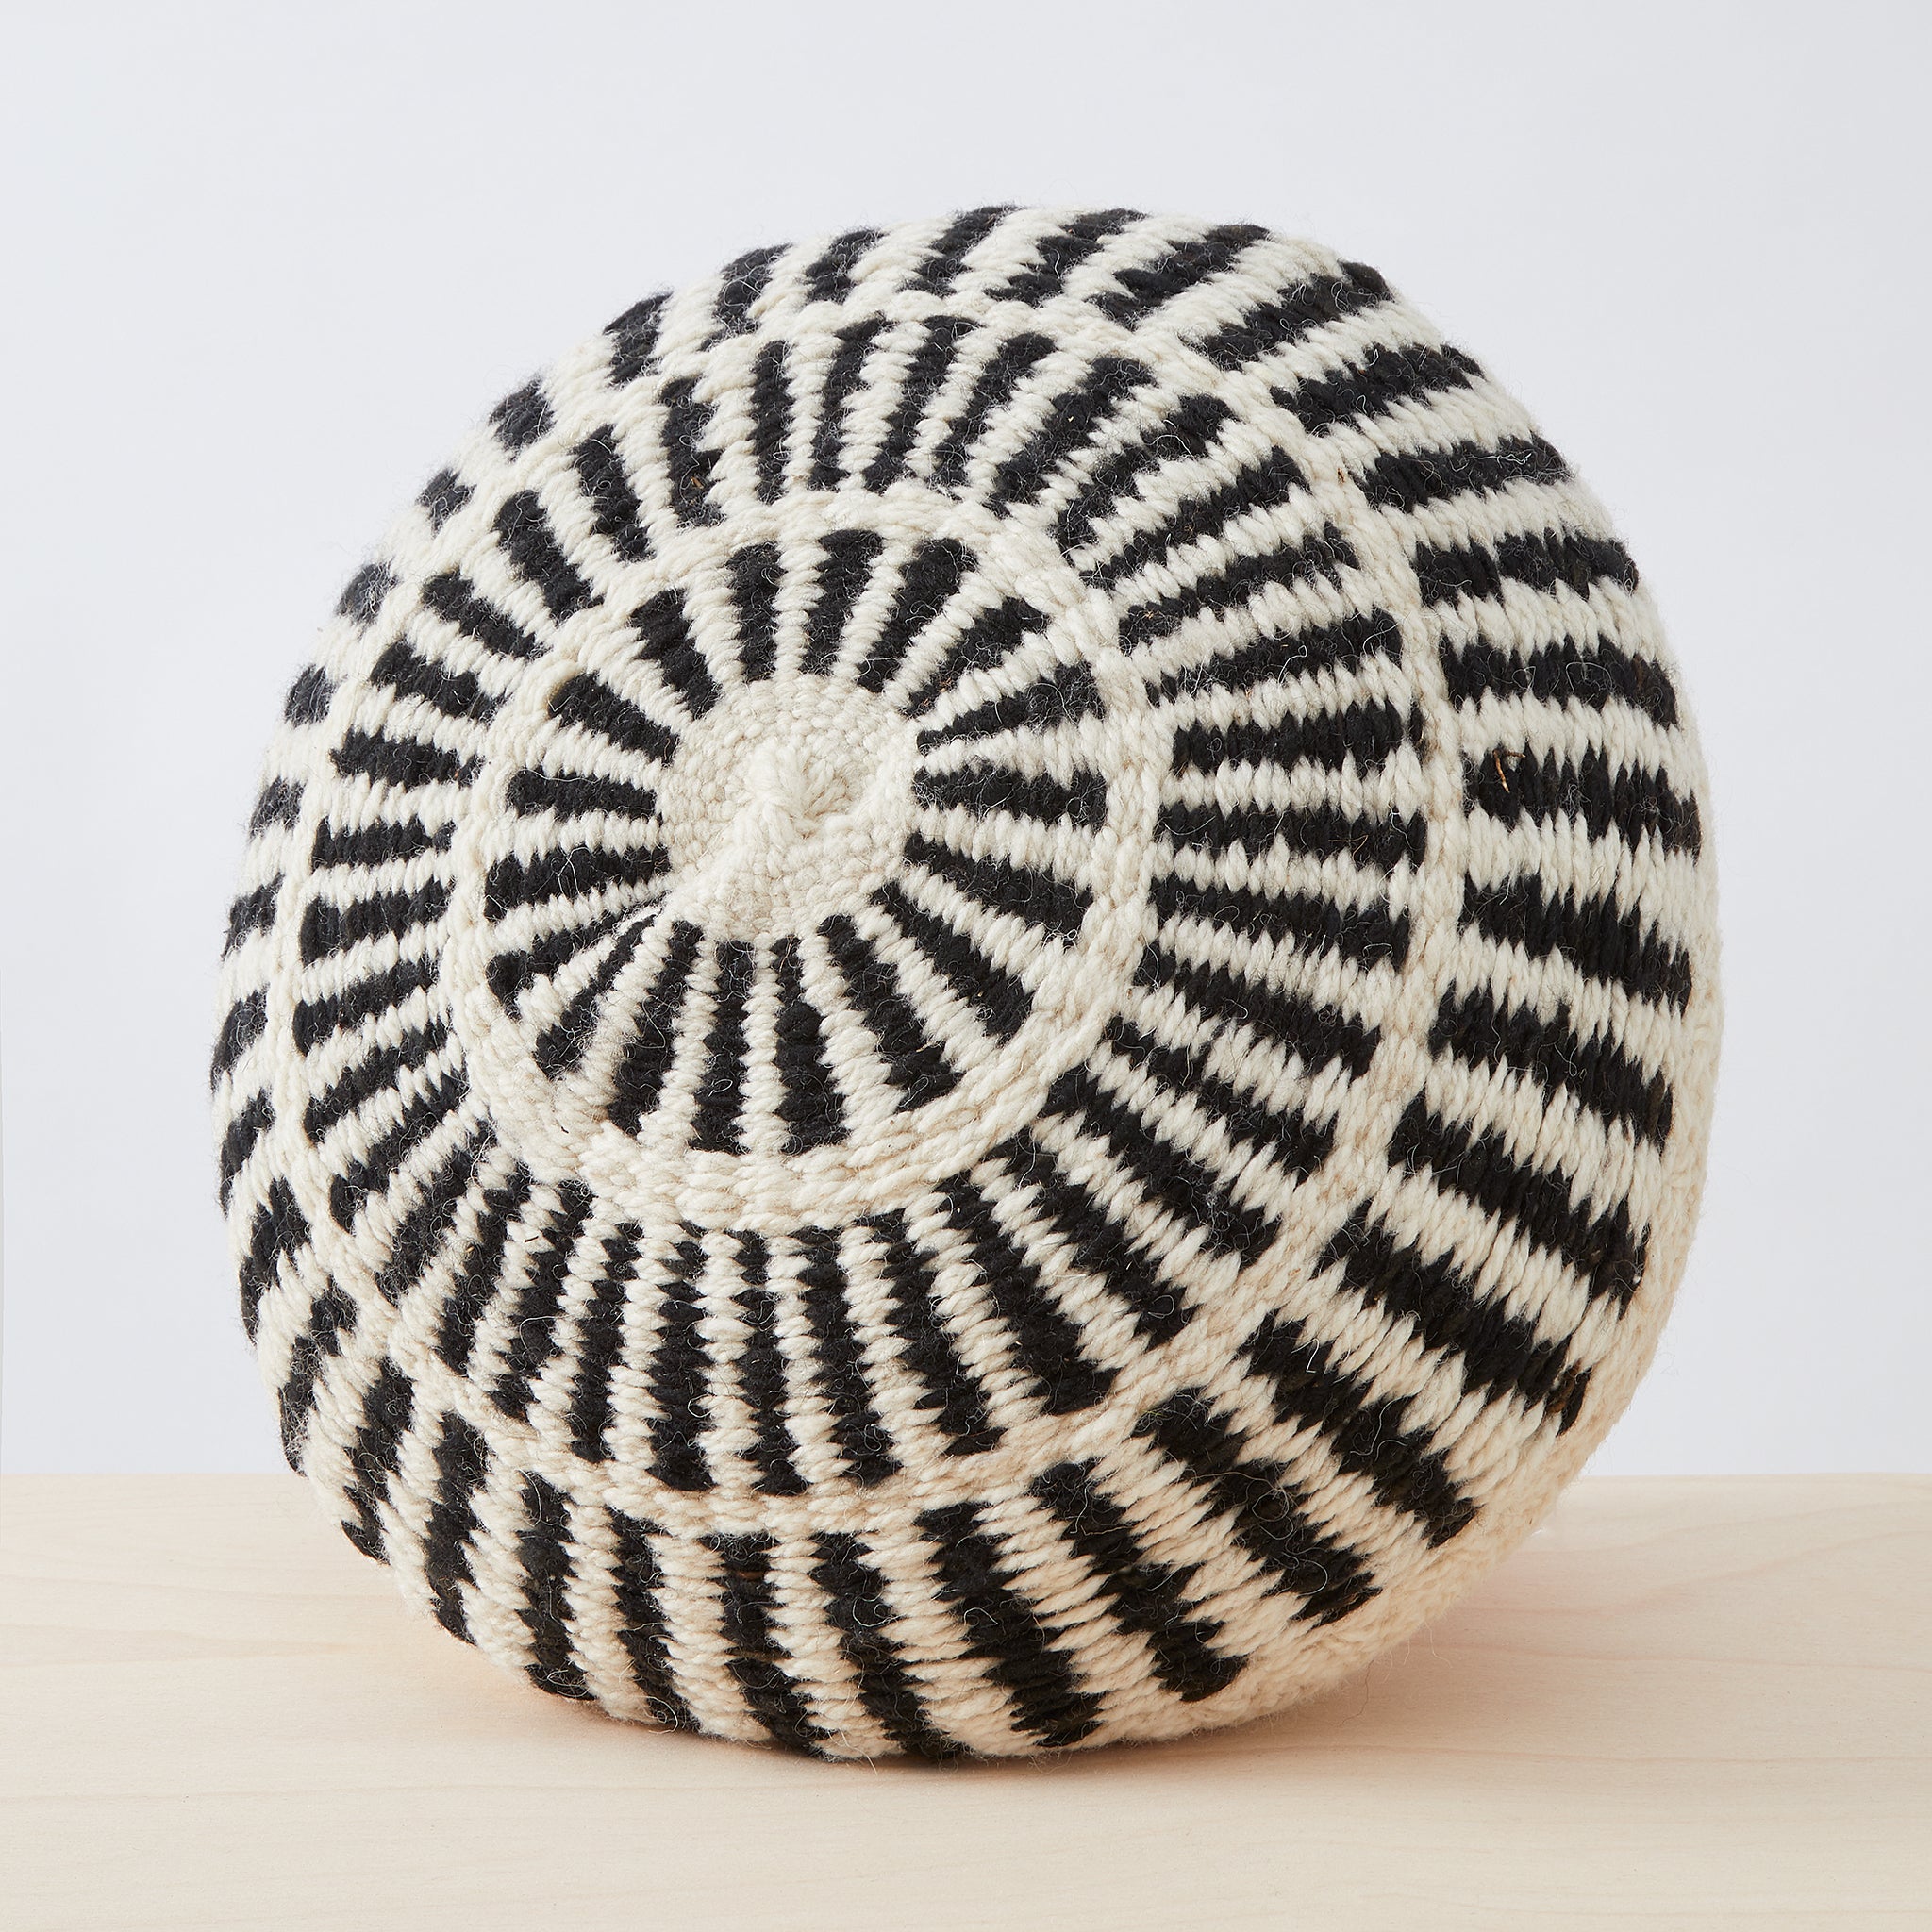 Individual handmade cushion in 100% Argentinian sheep's wool with a traditional pattern in natural white and black.